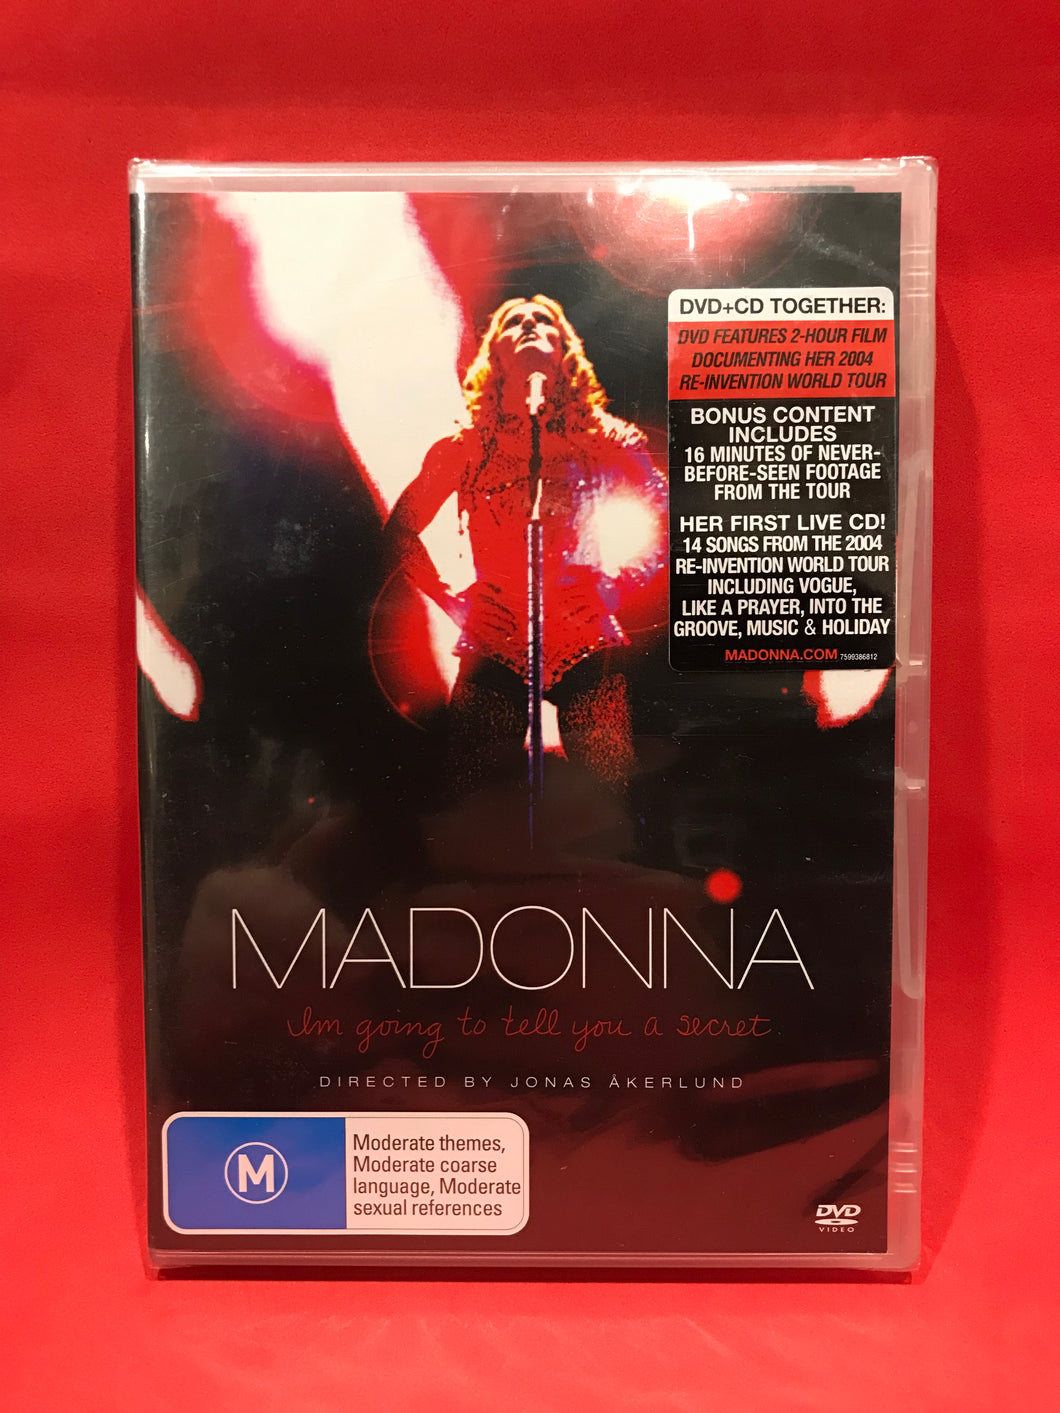 MADONNA - I'M GOING TO TELL YOU A SECRET - DVD + CD (SEALED)